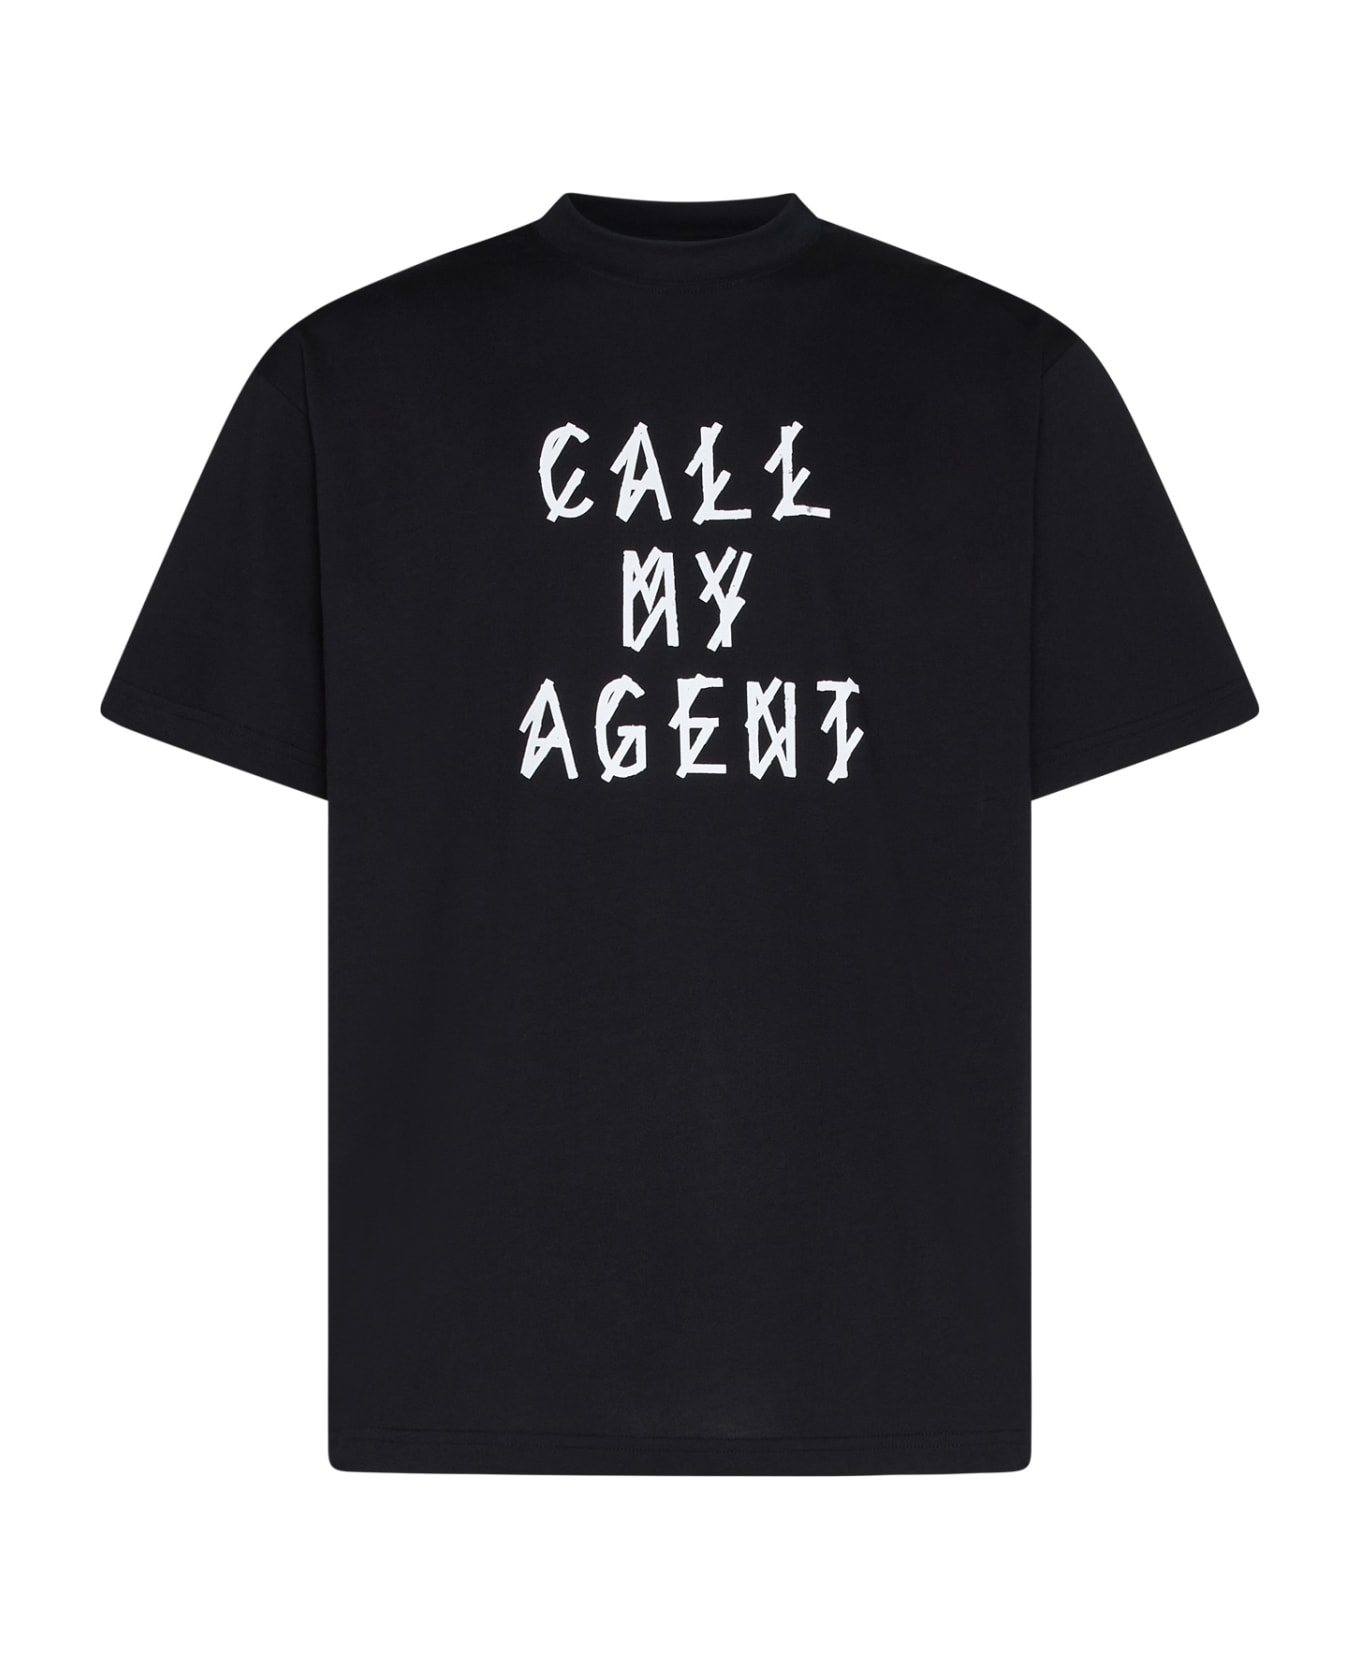 44 Label Group T-Shirt - Black+call my agent シャツ